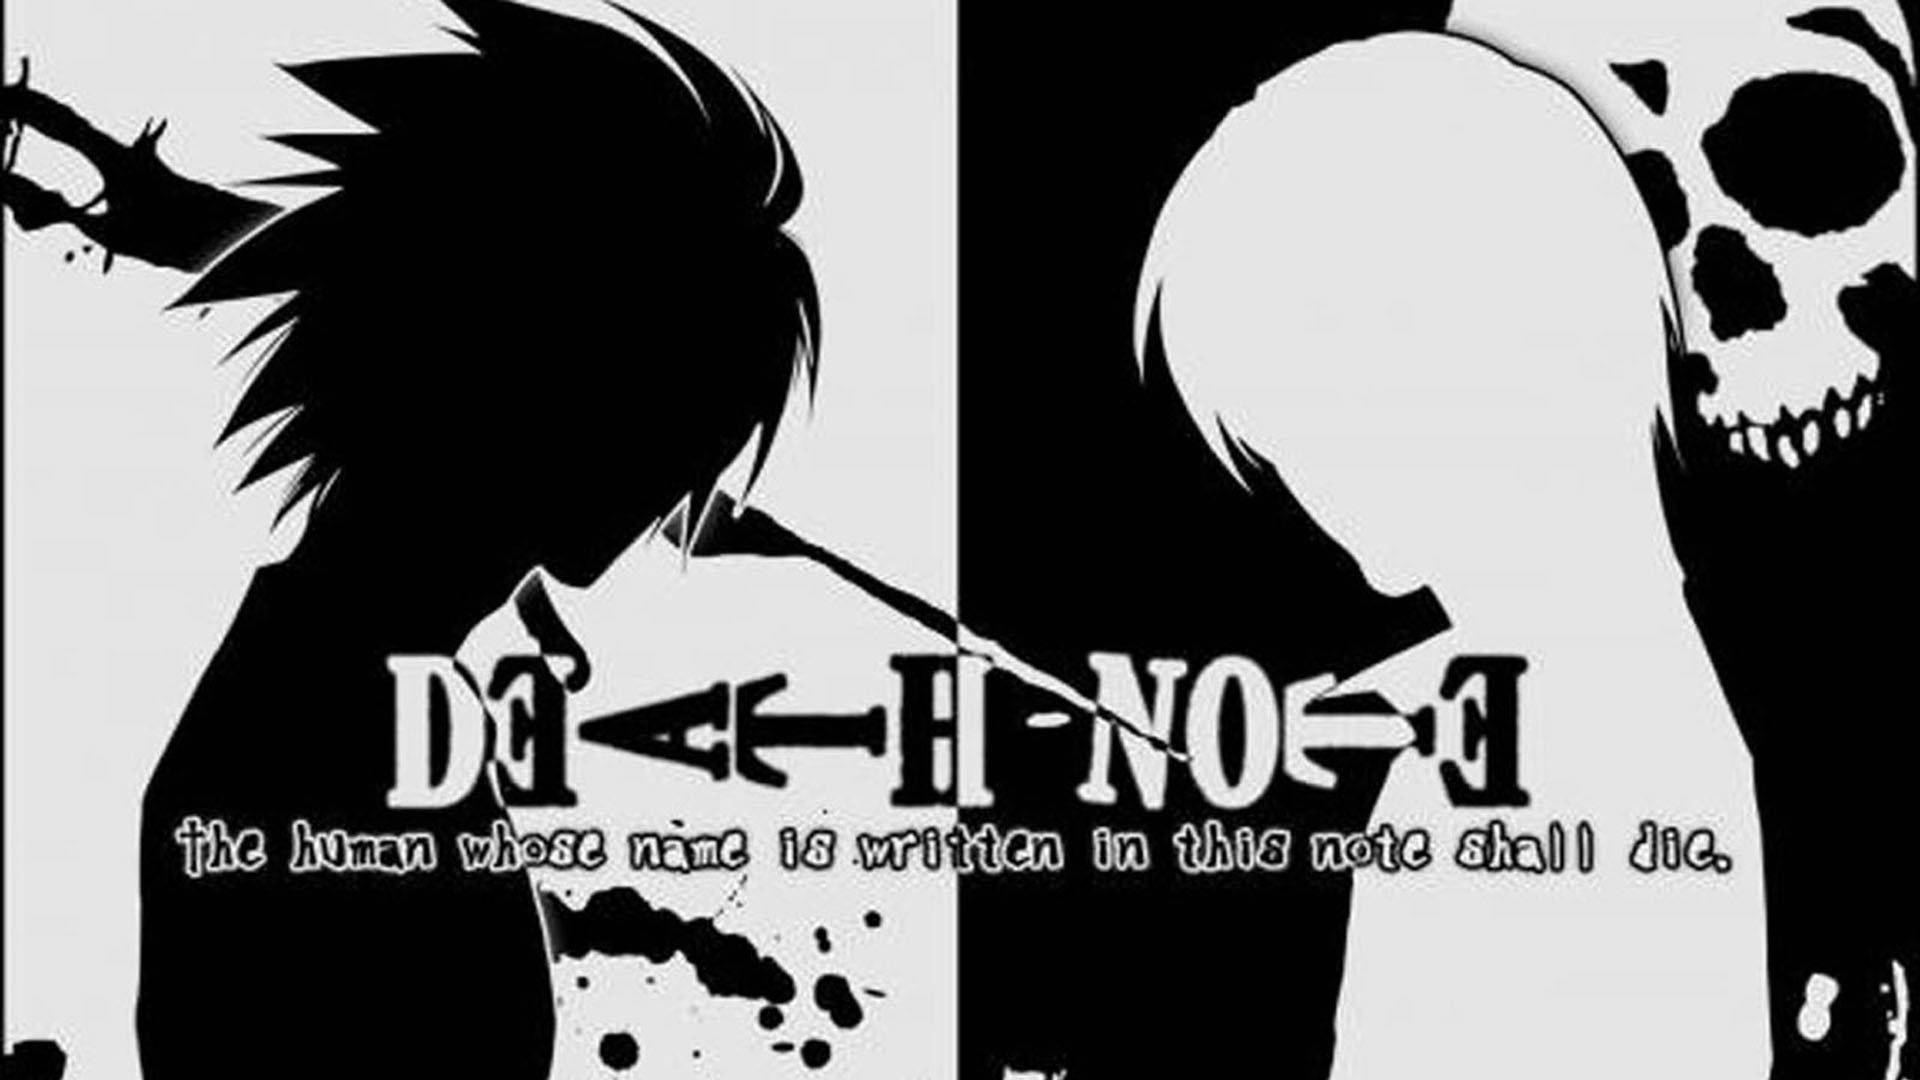 "Light Yagami challenges destiny in Death Note." Wallpaper